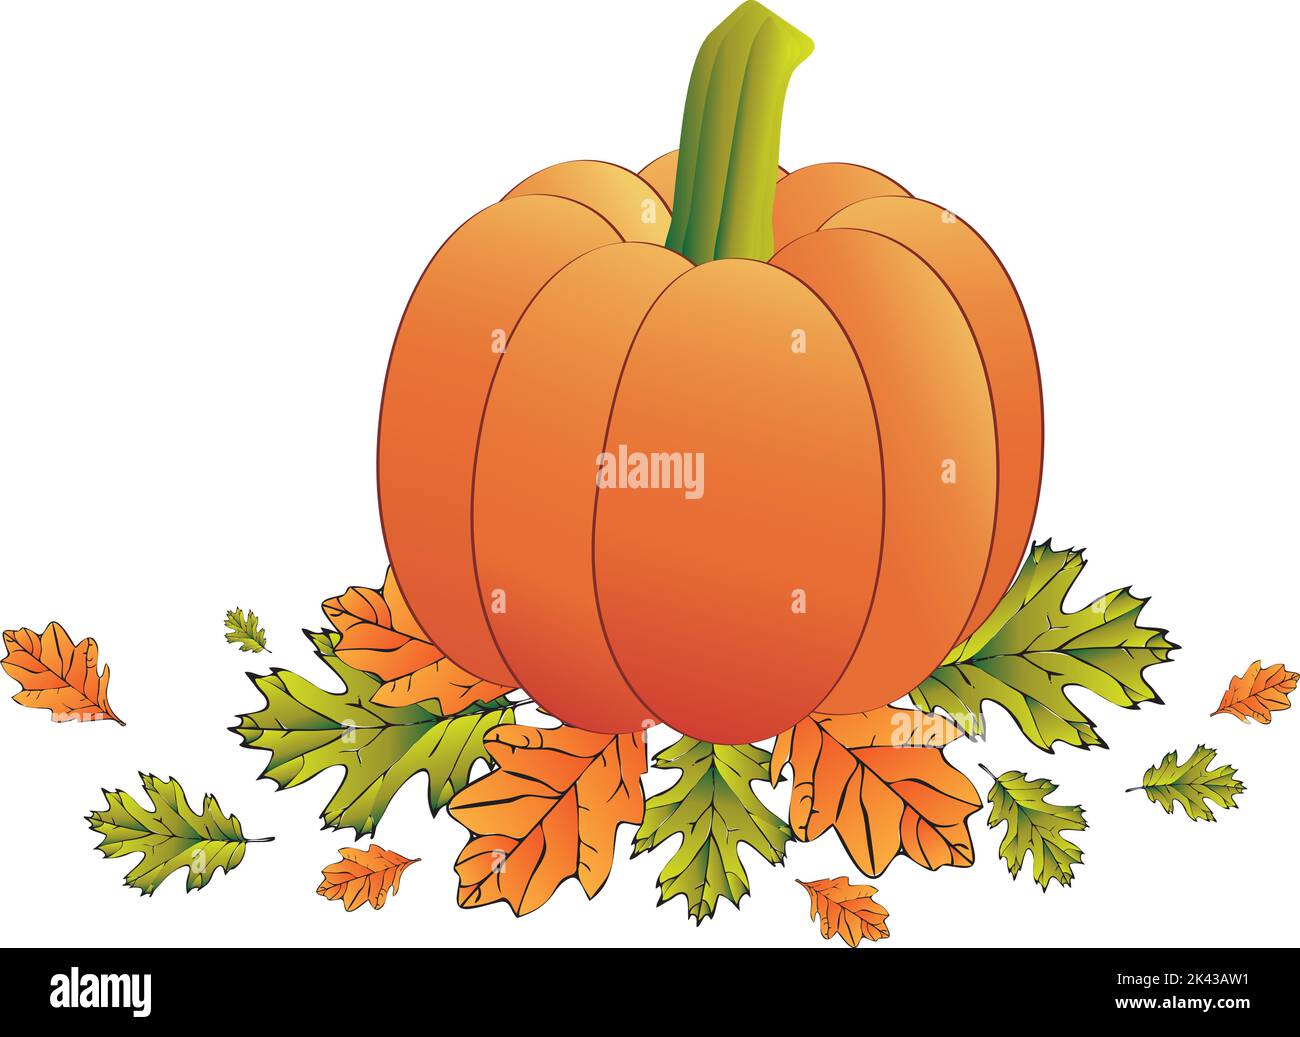 Fall leaves and pumpkin on ground Stock Vector